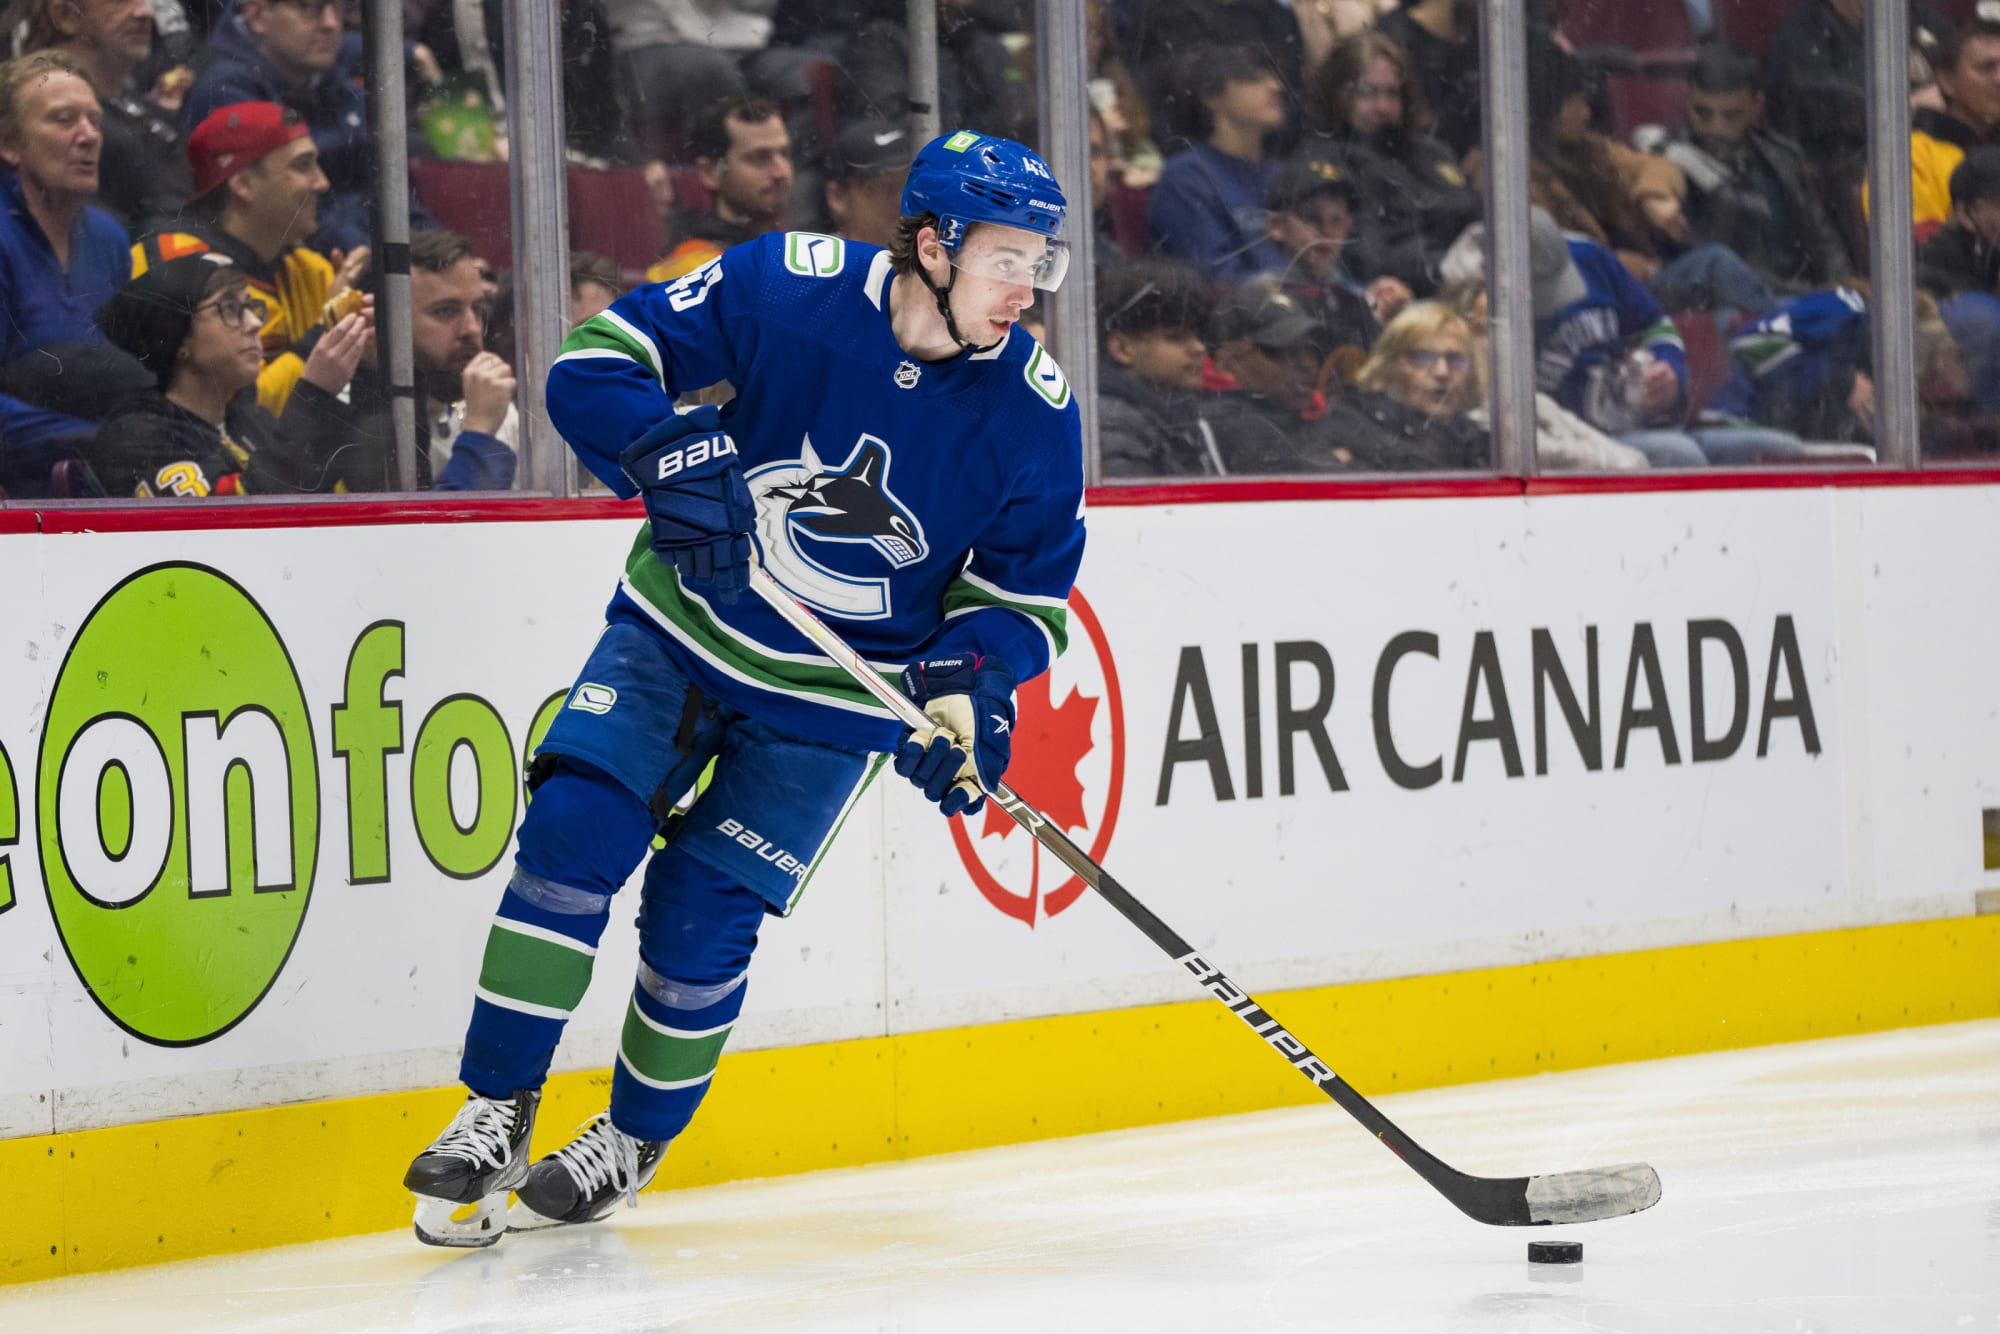 Quinn Hughes has bounced back defensively with the Canucks this season